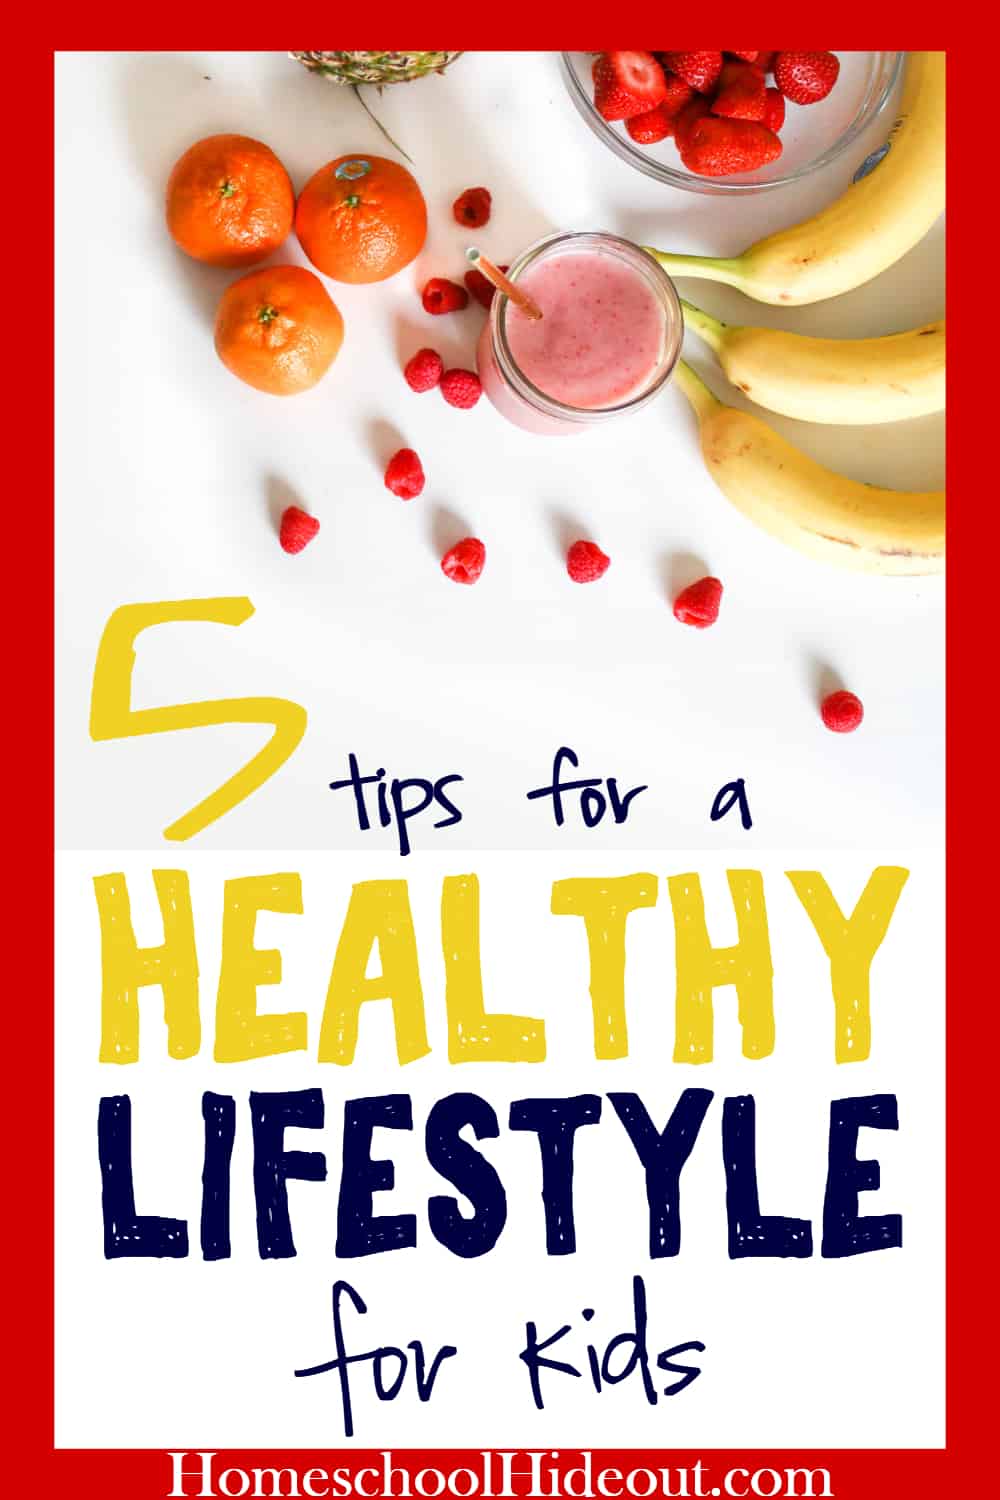 Promote a healthy lifestyle for kids with simple changes to their routine. These 5 tips will make your life easier and make your kids more healthy!